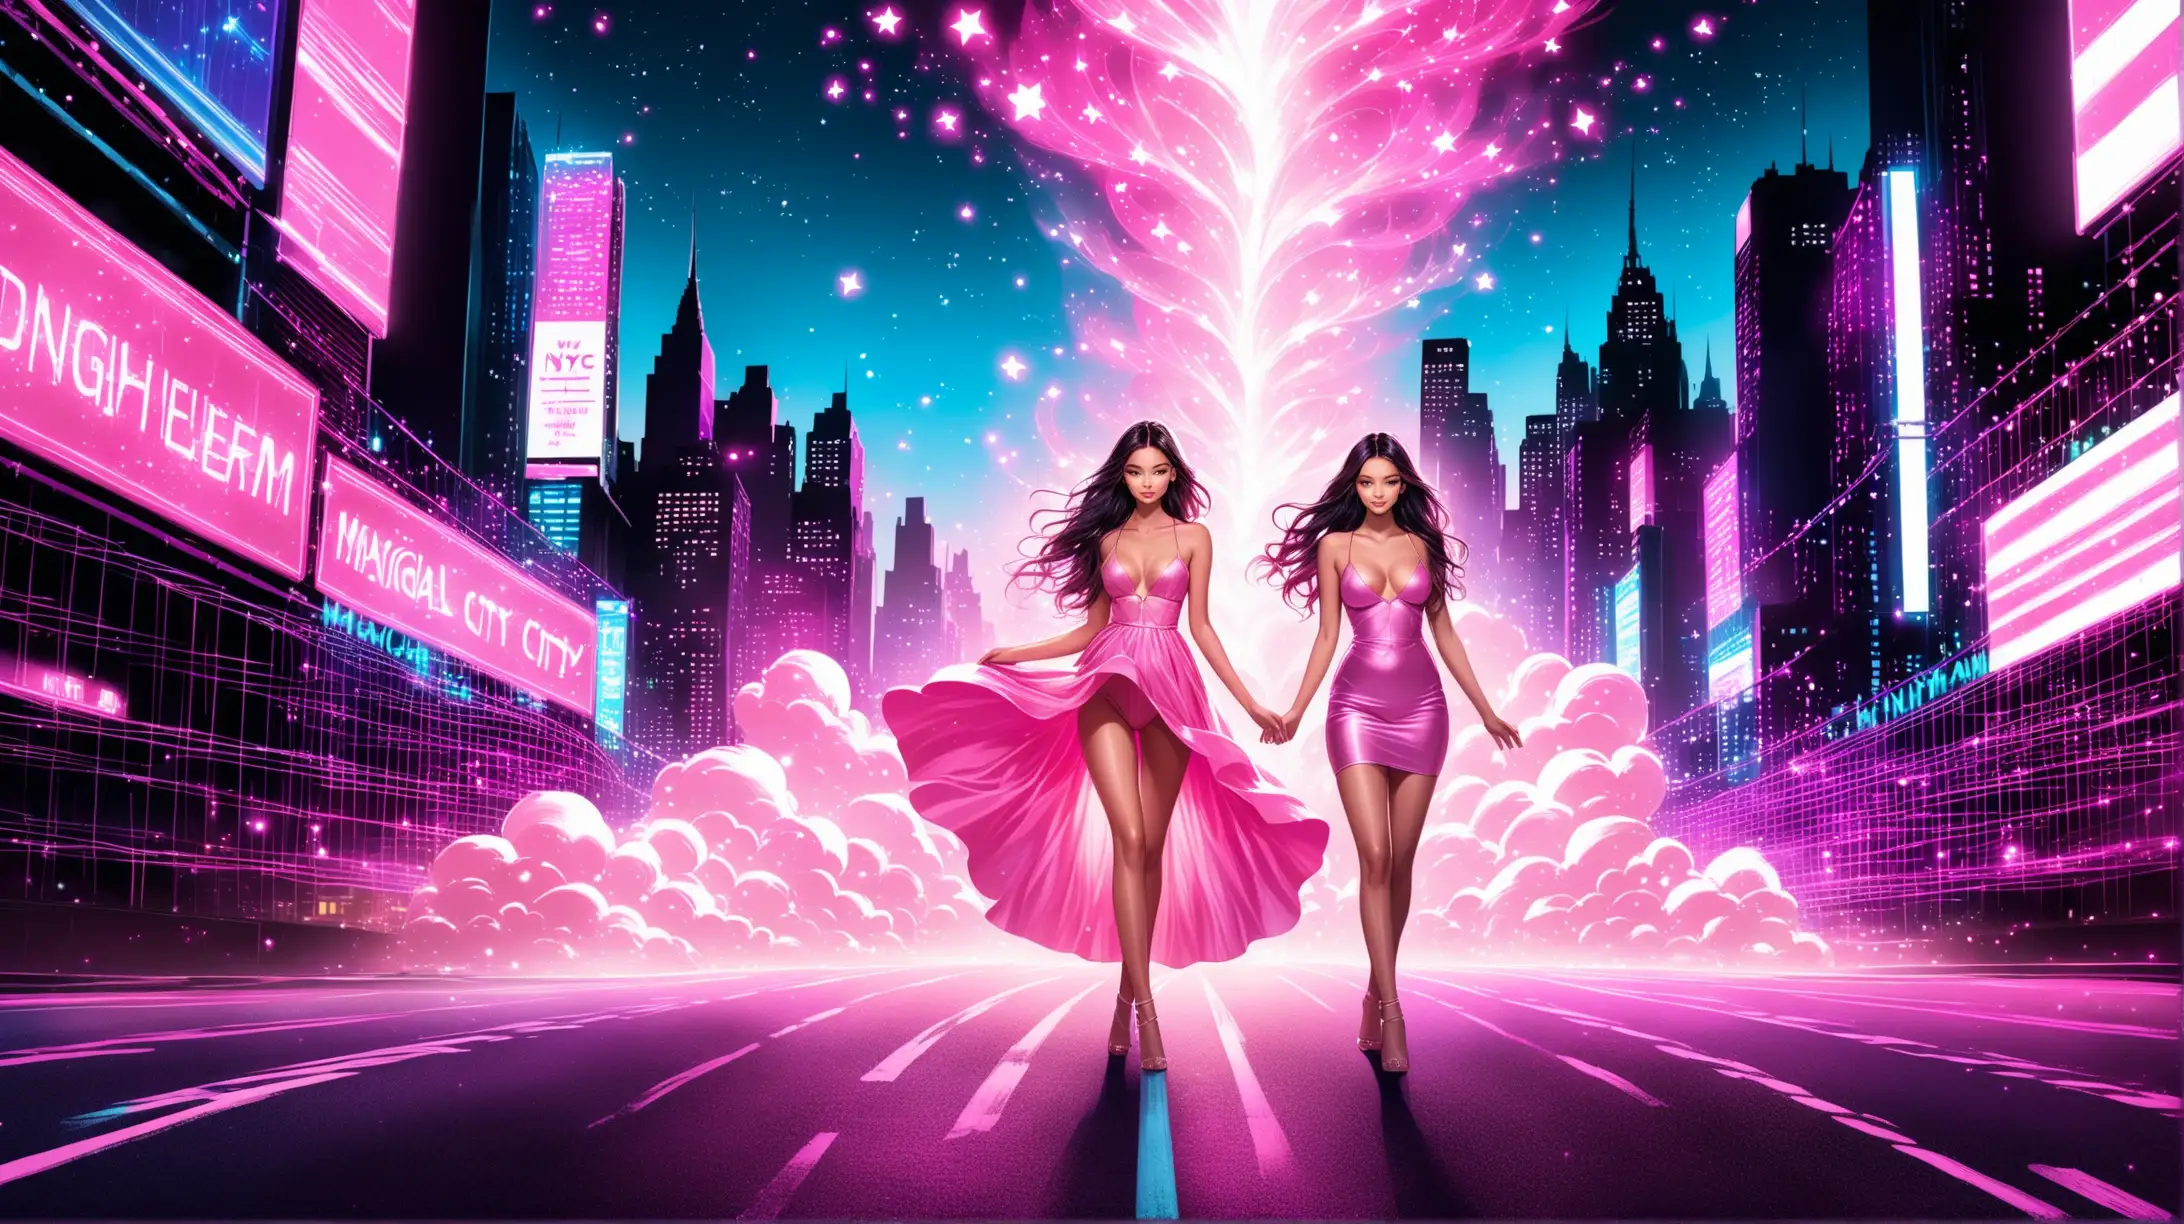 nymph models, magical atmosphere, pink and blue, black background, nyc dream city, roads, influencers